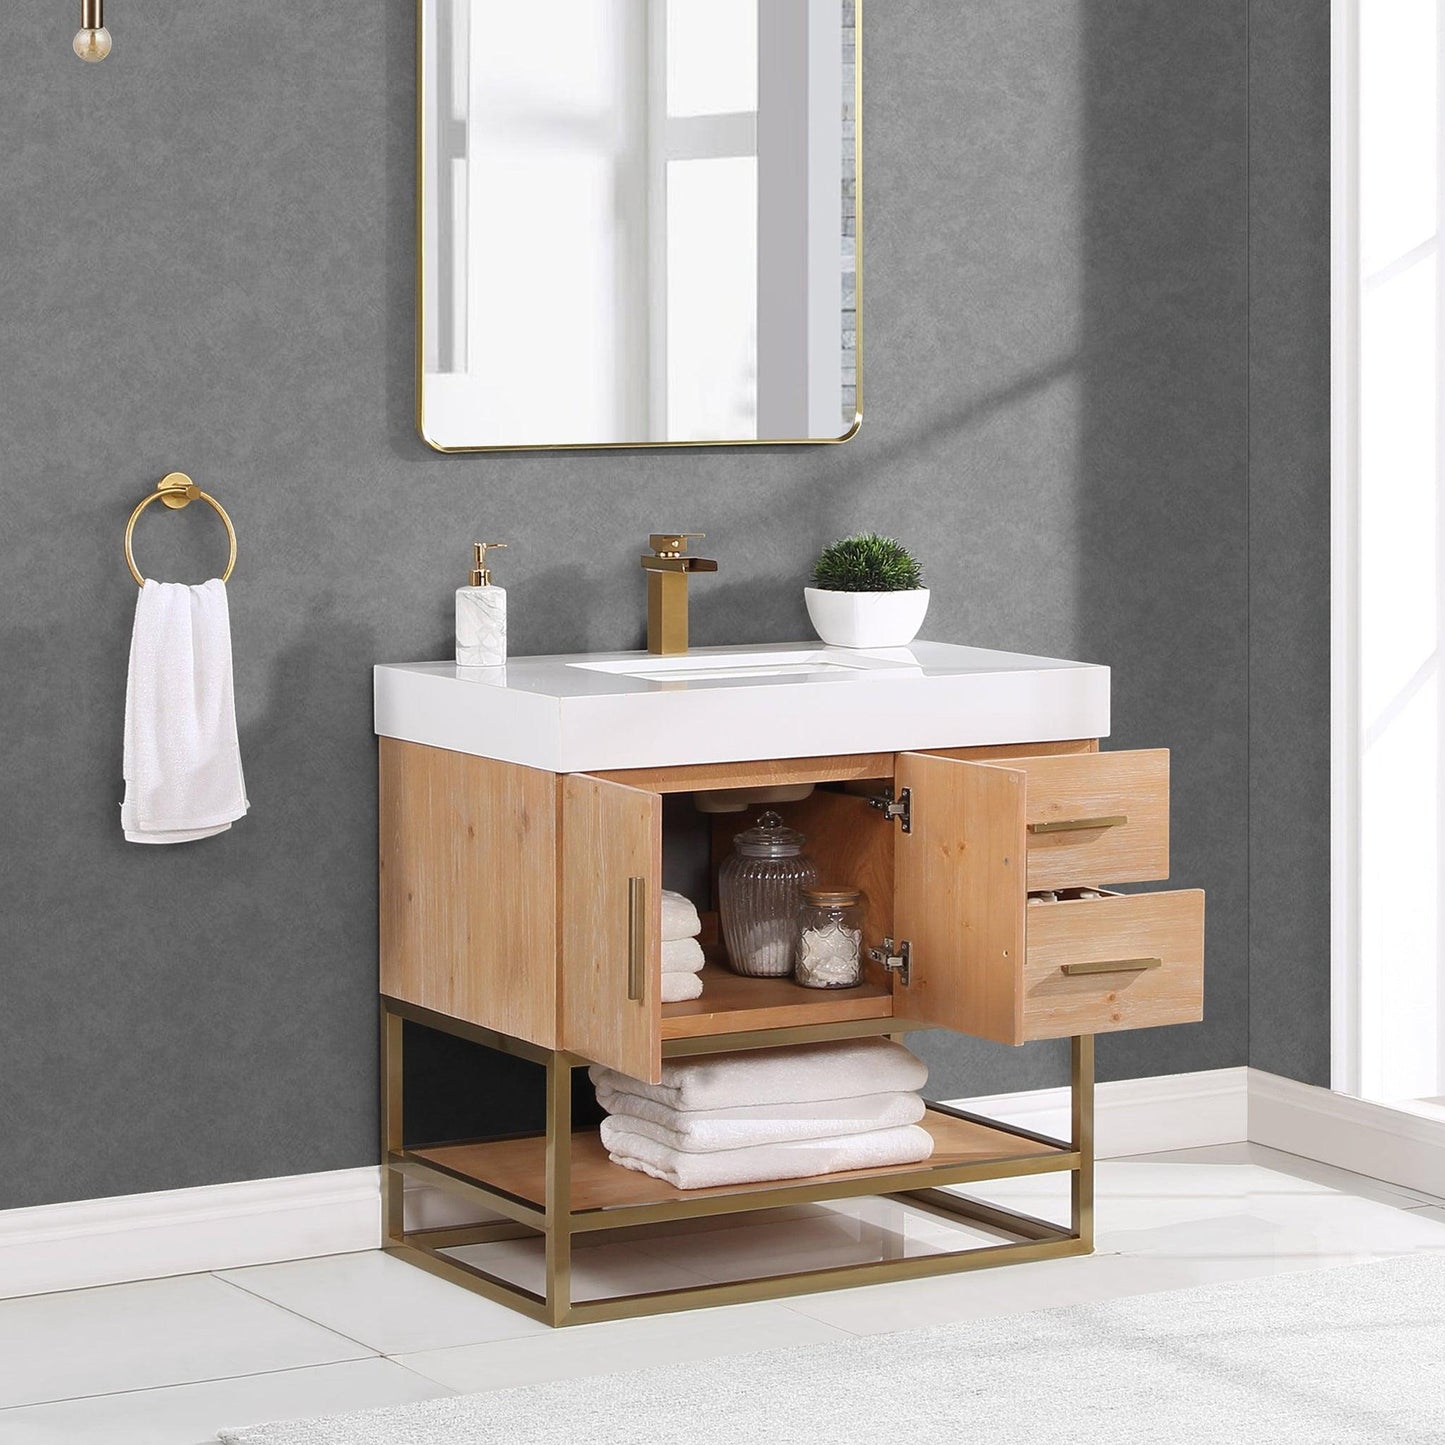 Altair Bianco 36" Light Brown Freestanding Single Bathroom Vanity Set With Brushed Gold Support Base, White Composite Stone Top, Single Rectangular Undermount Ceramic Sink, and Overflow